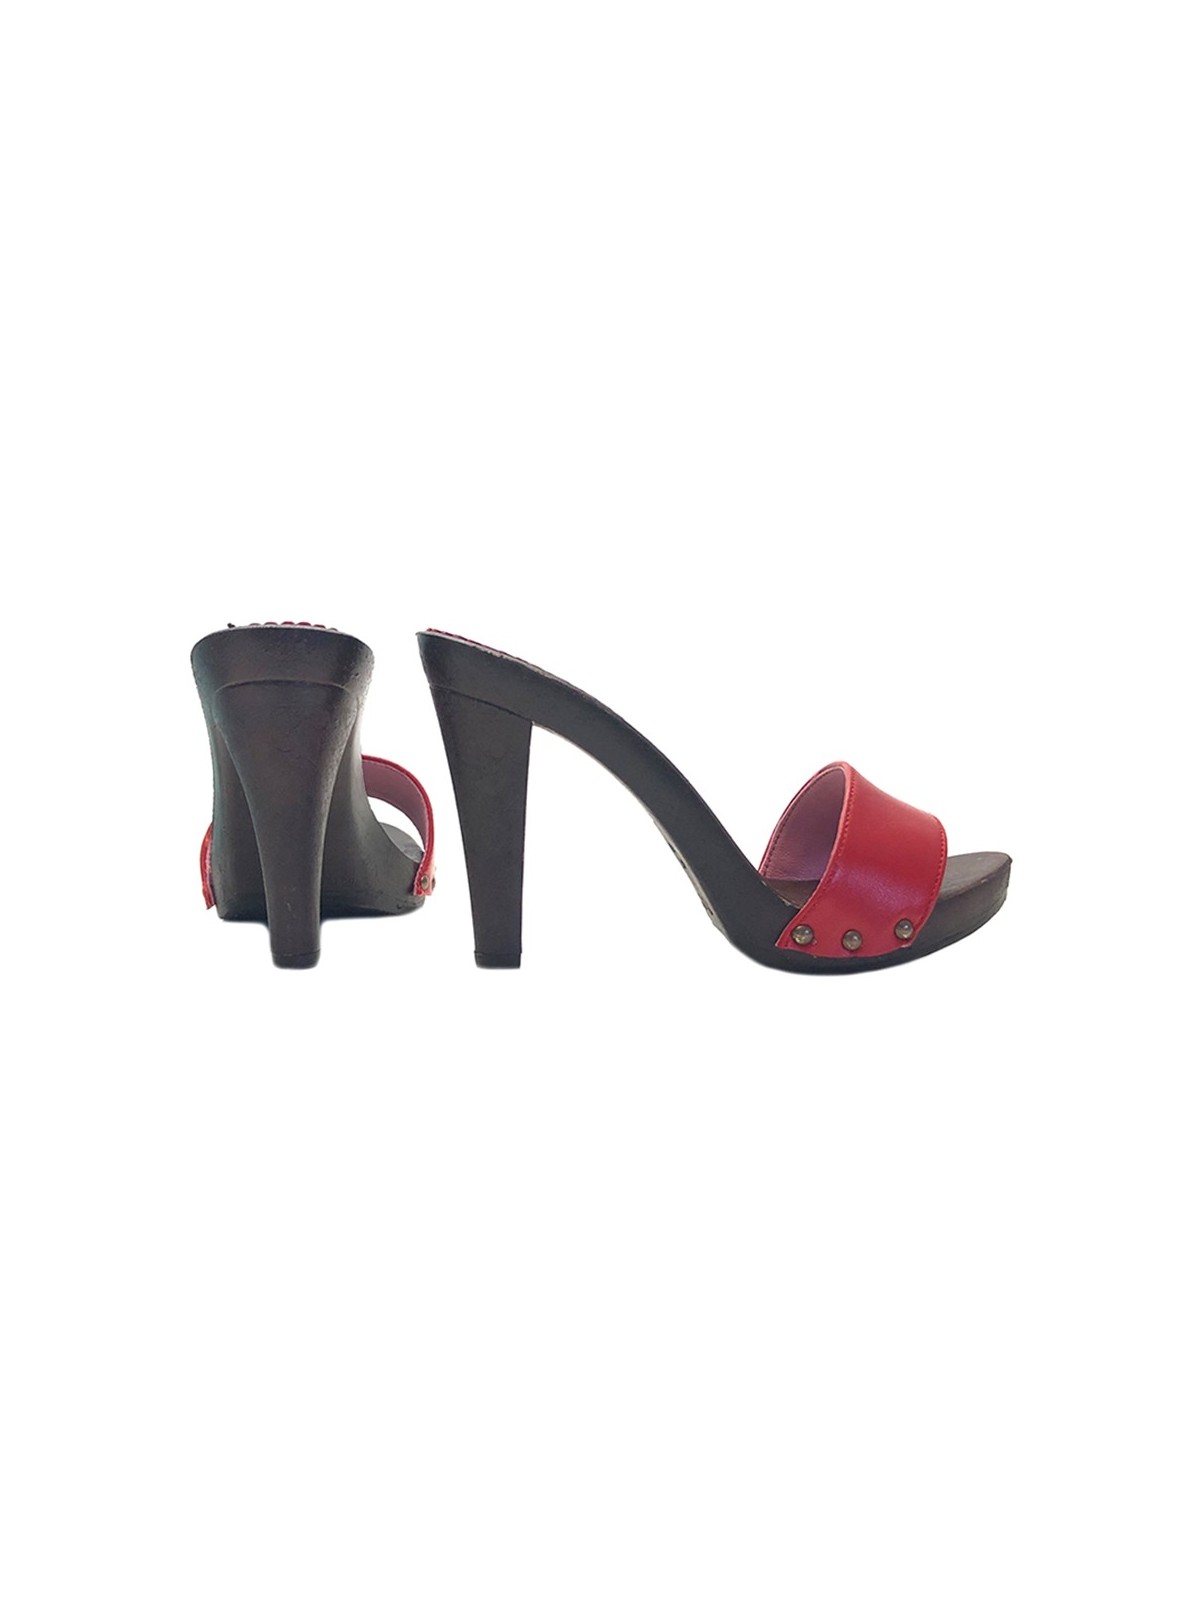 RED LEATHER CLOGS HEEL 11